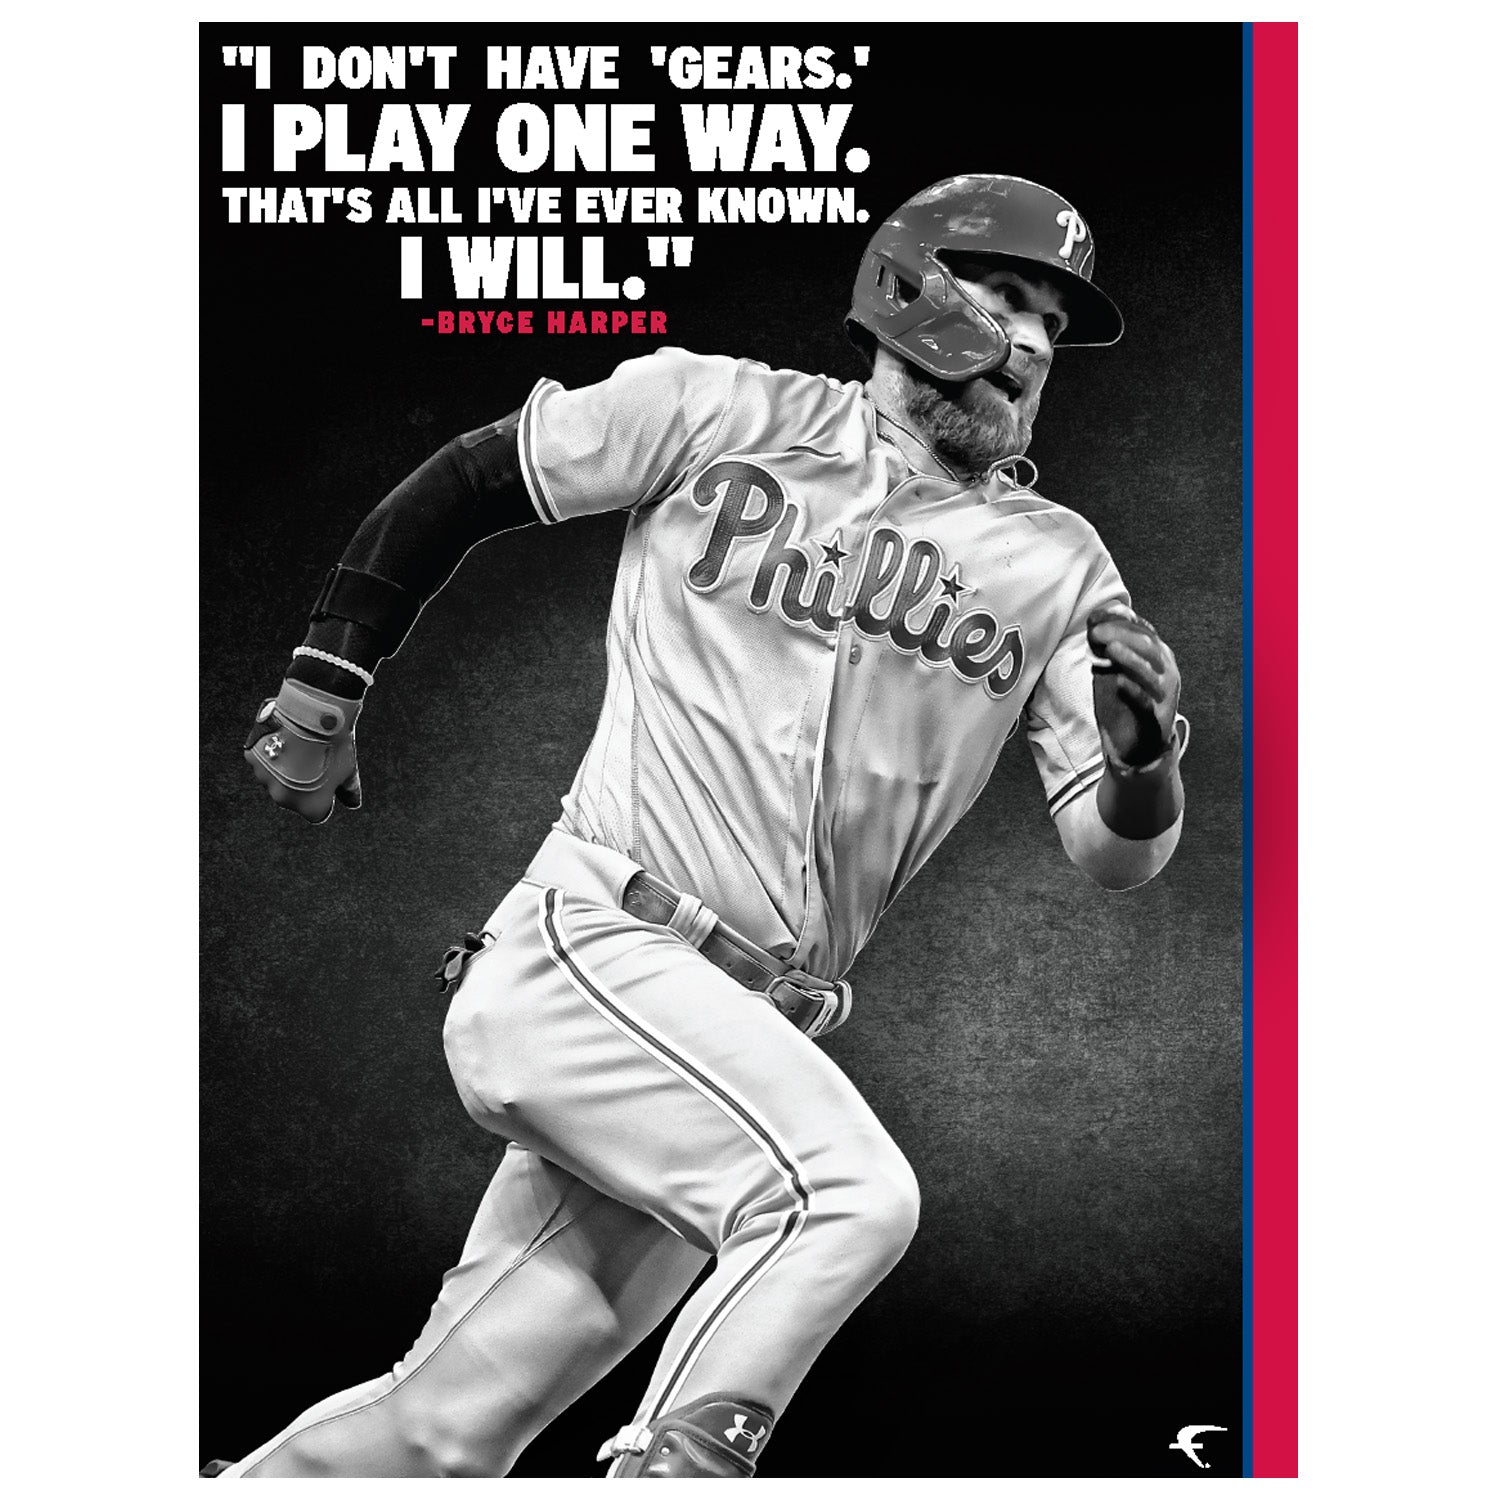 Shops selling the coolest Bryce Harper and Philadelphia Phillies T